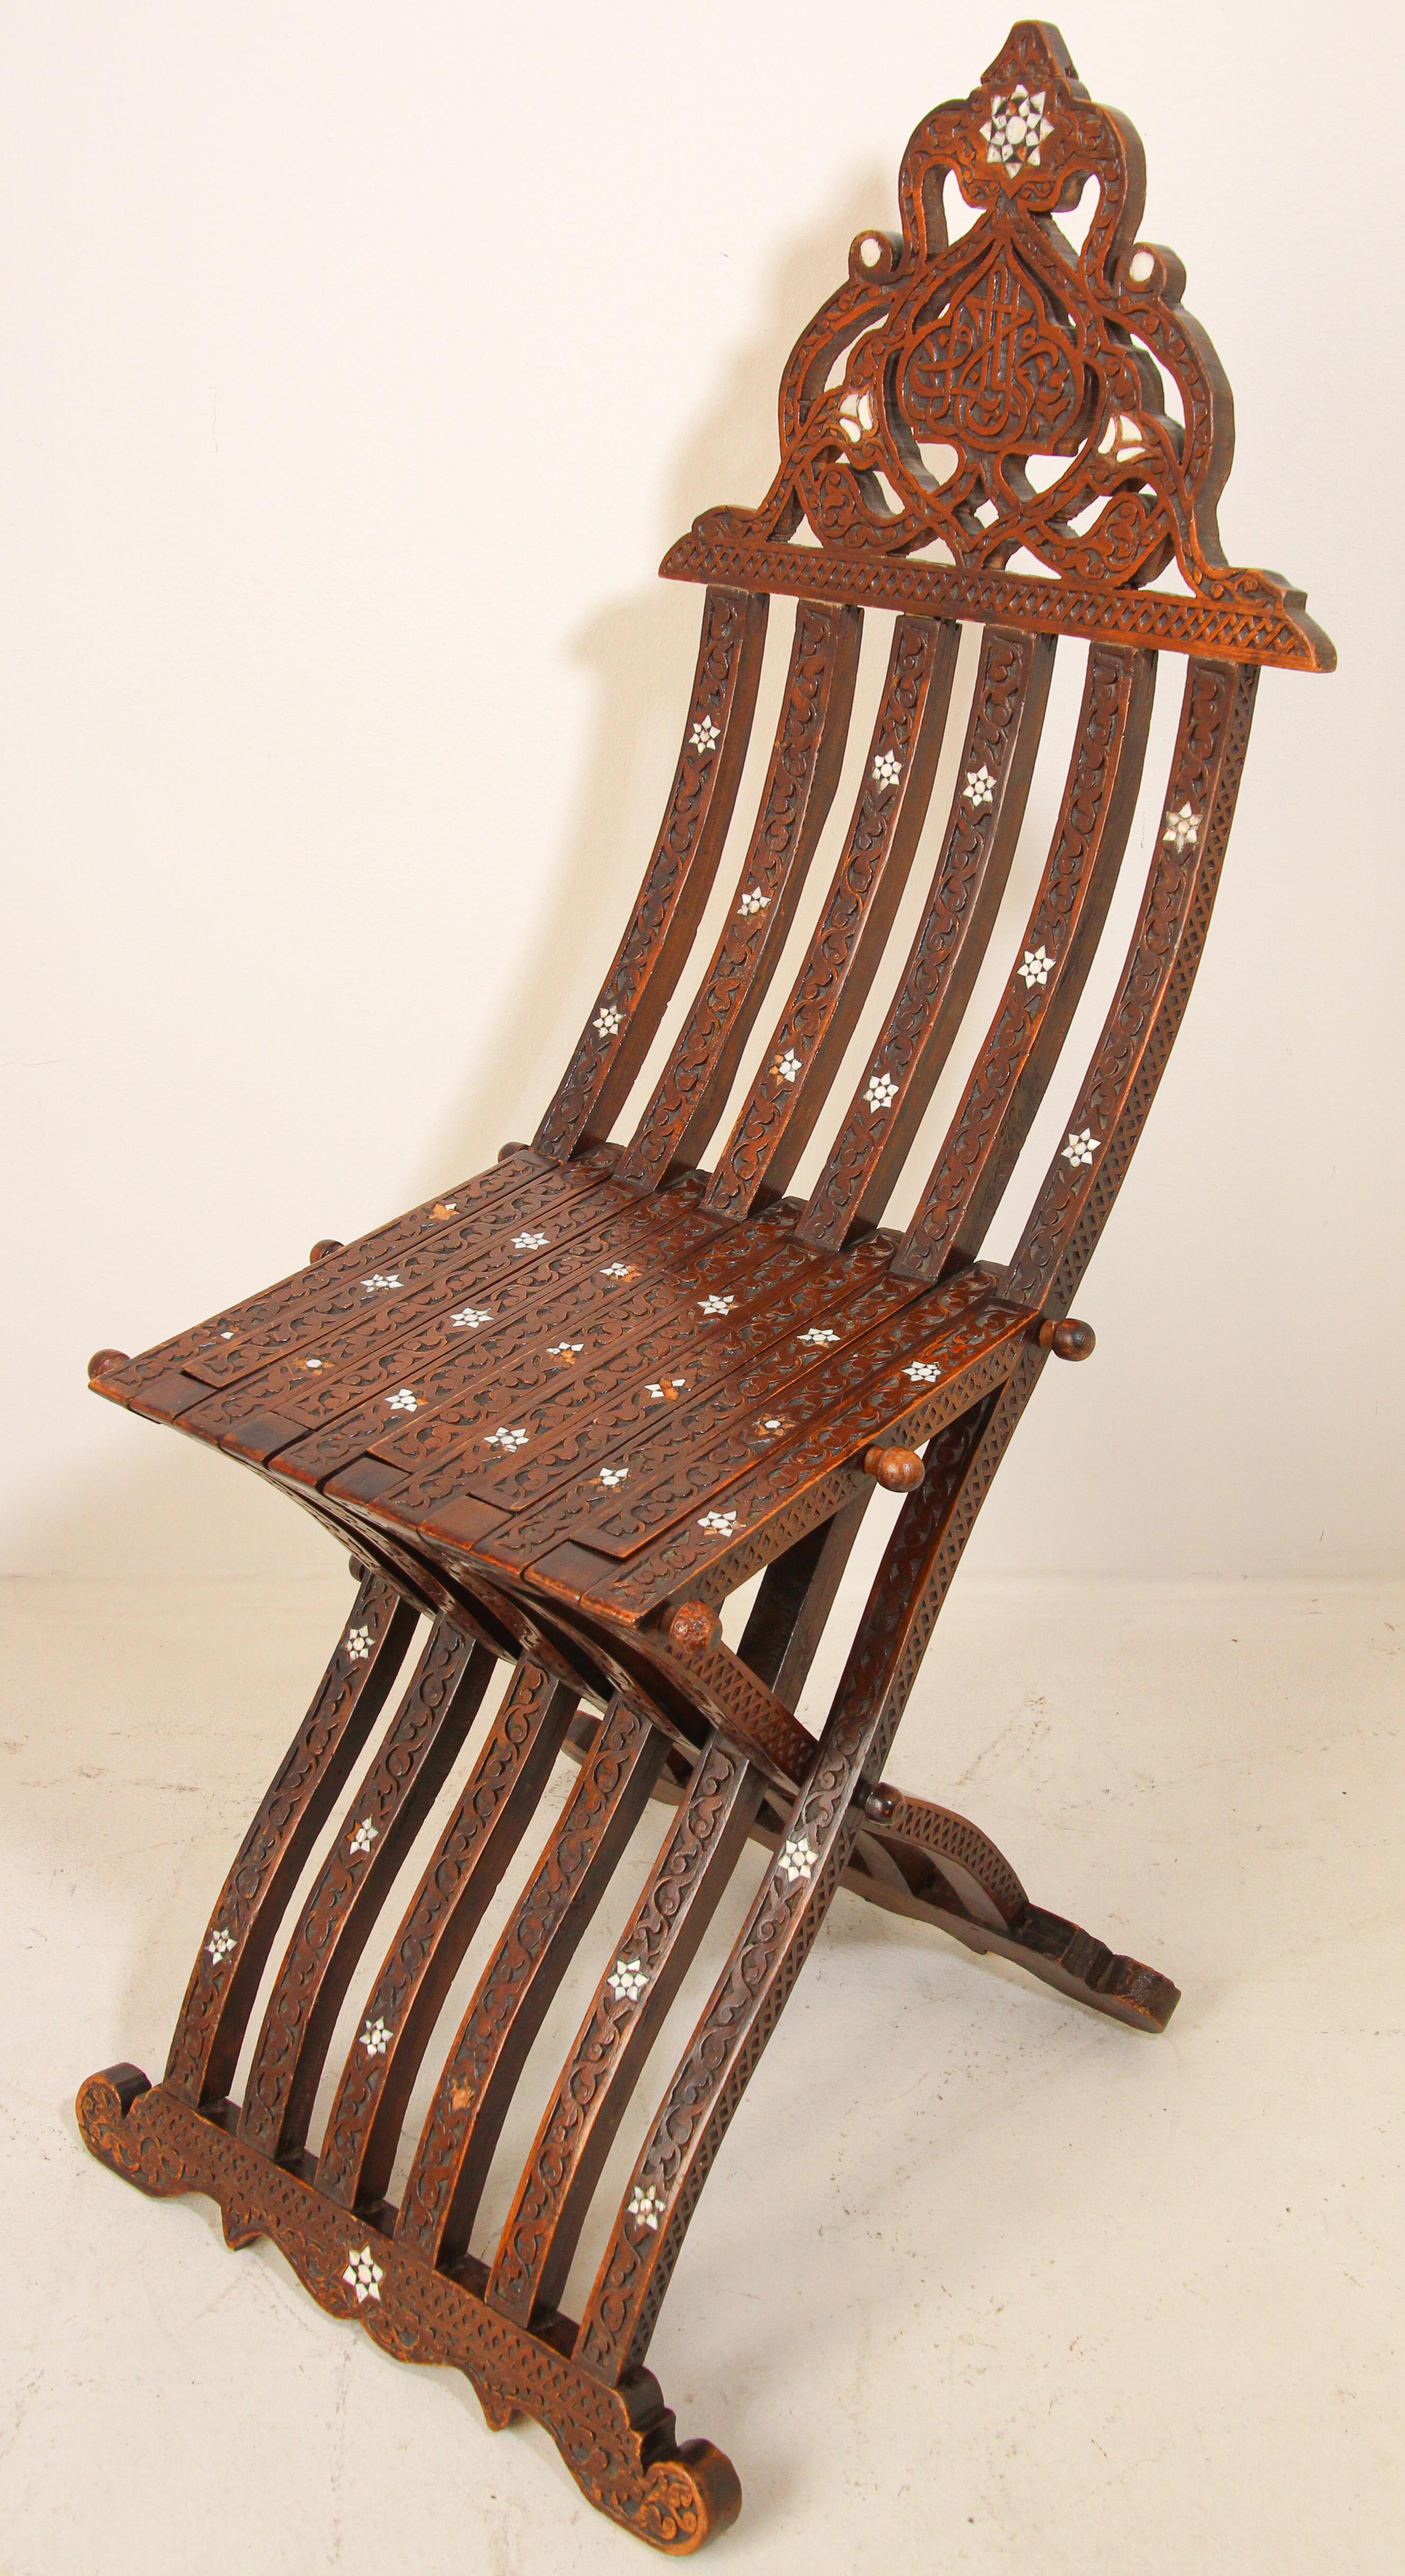 Antique Middle Eastern Egyptian Moorish walnut wood folding chair with intricate foliate carving and mother of pearl, shell inlays.
Arabian Syrian style folding chair inlaid with mother of pearl stars designs, hand carved with Arabic calligraphy